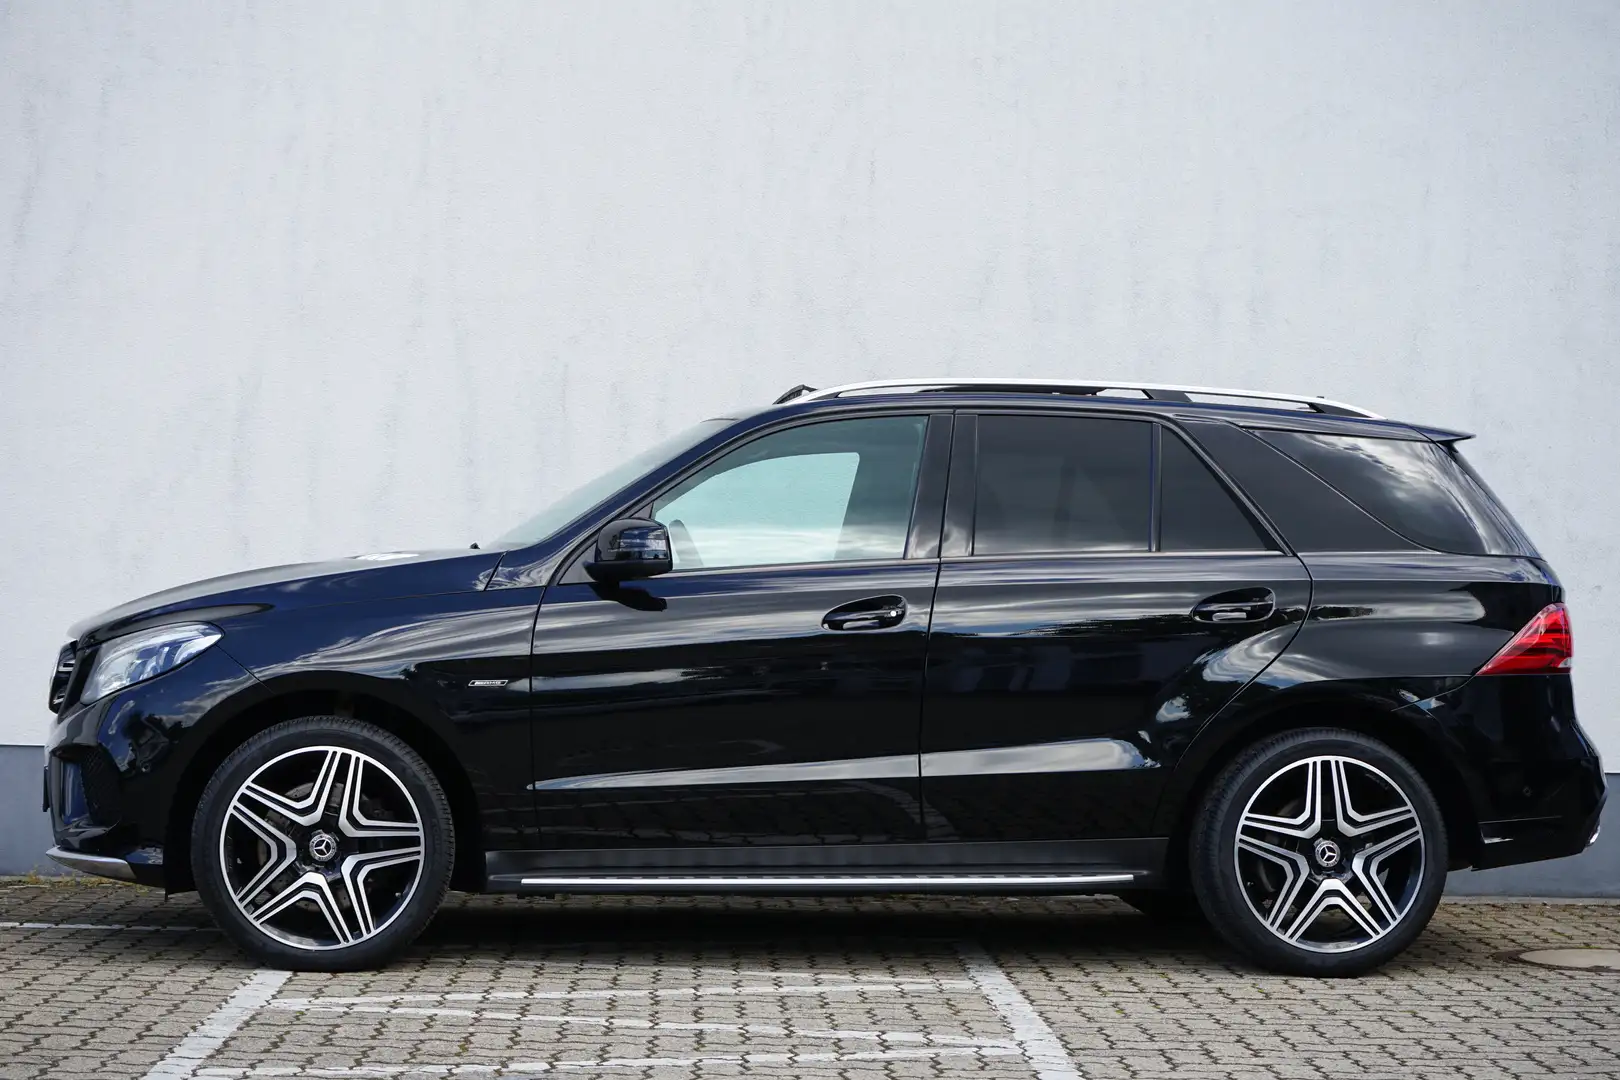 Mercedes-Benz GLE 450 4MATIC*21 Zoll*Panorama*LED ILS*Standheizung*Voll Zwart - 2